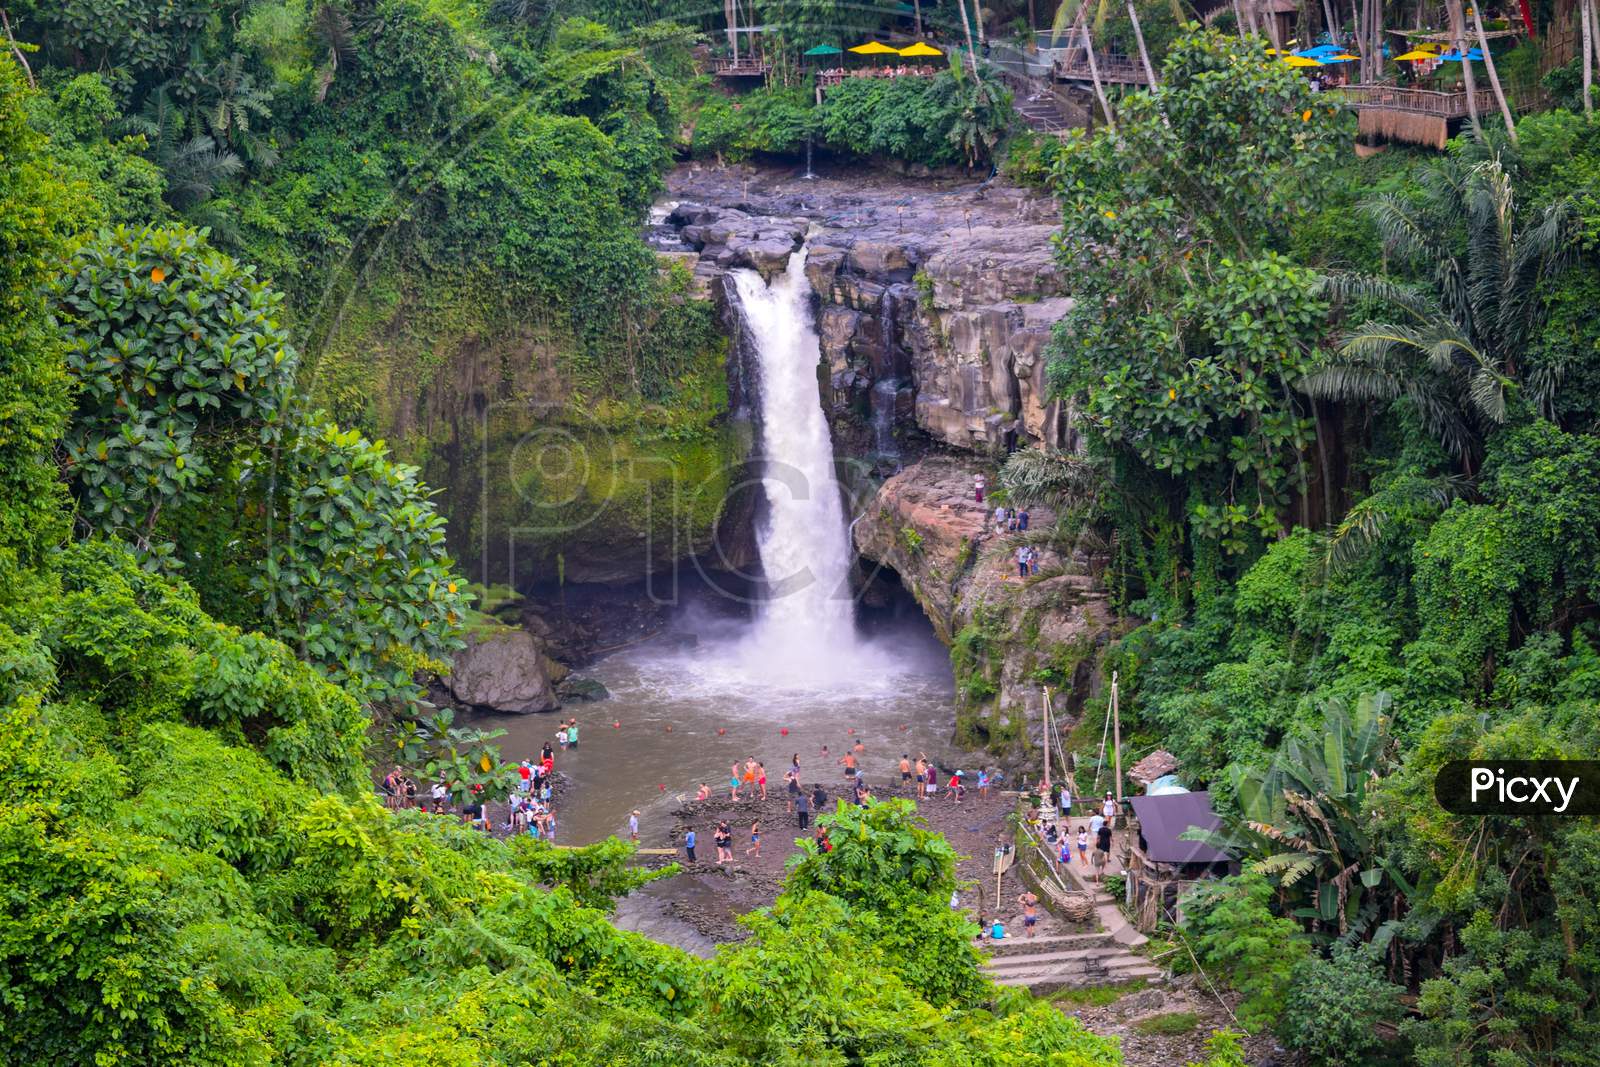 Tegenungan Waterfall is a beautiful waterfall located in plateau area and it is one of places of interest of Bali, Tegenungan waterfall in Bali, Indonesia